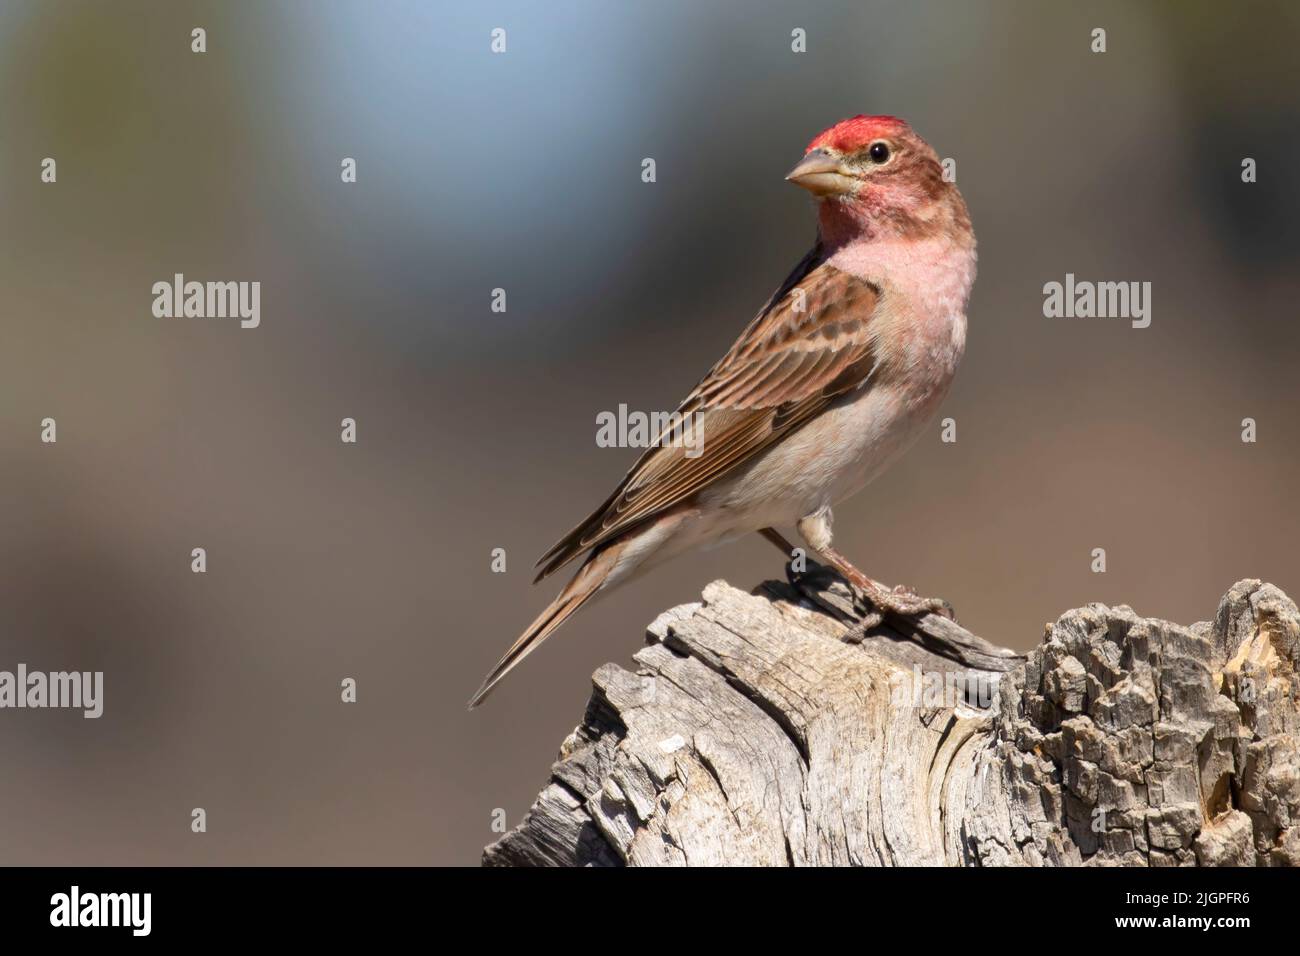 Cassin's Finch (Haemorhous cassinii), Cabin Lake Viewing Blind, Deschutes National Forest, Oregon Stockfoto